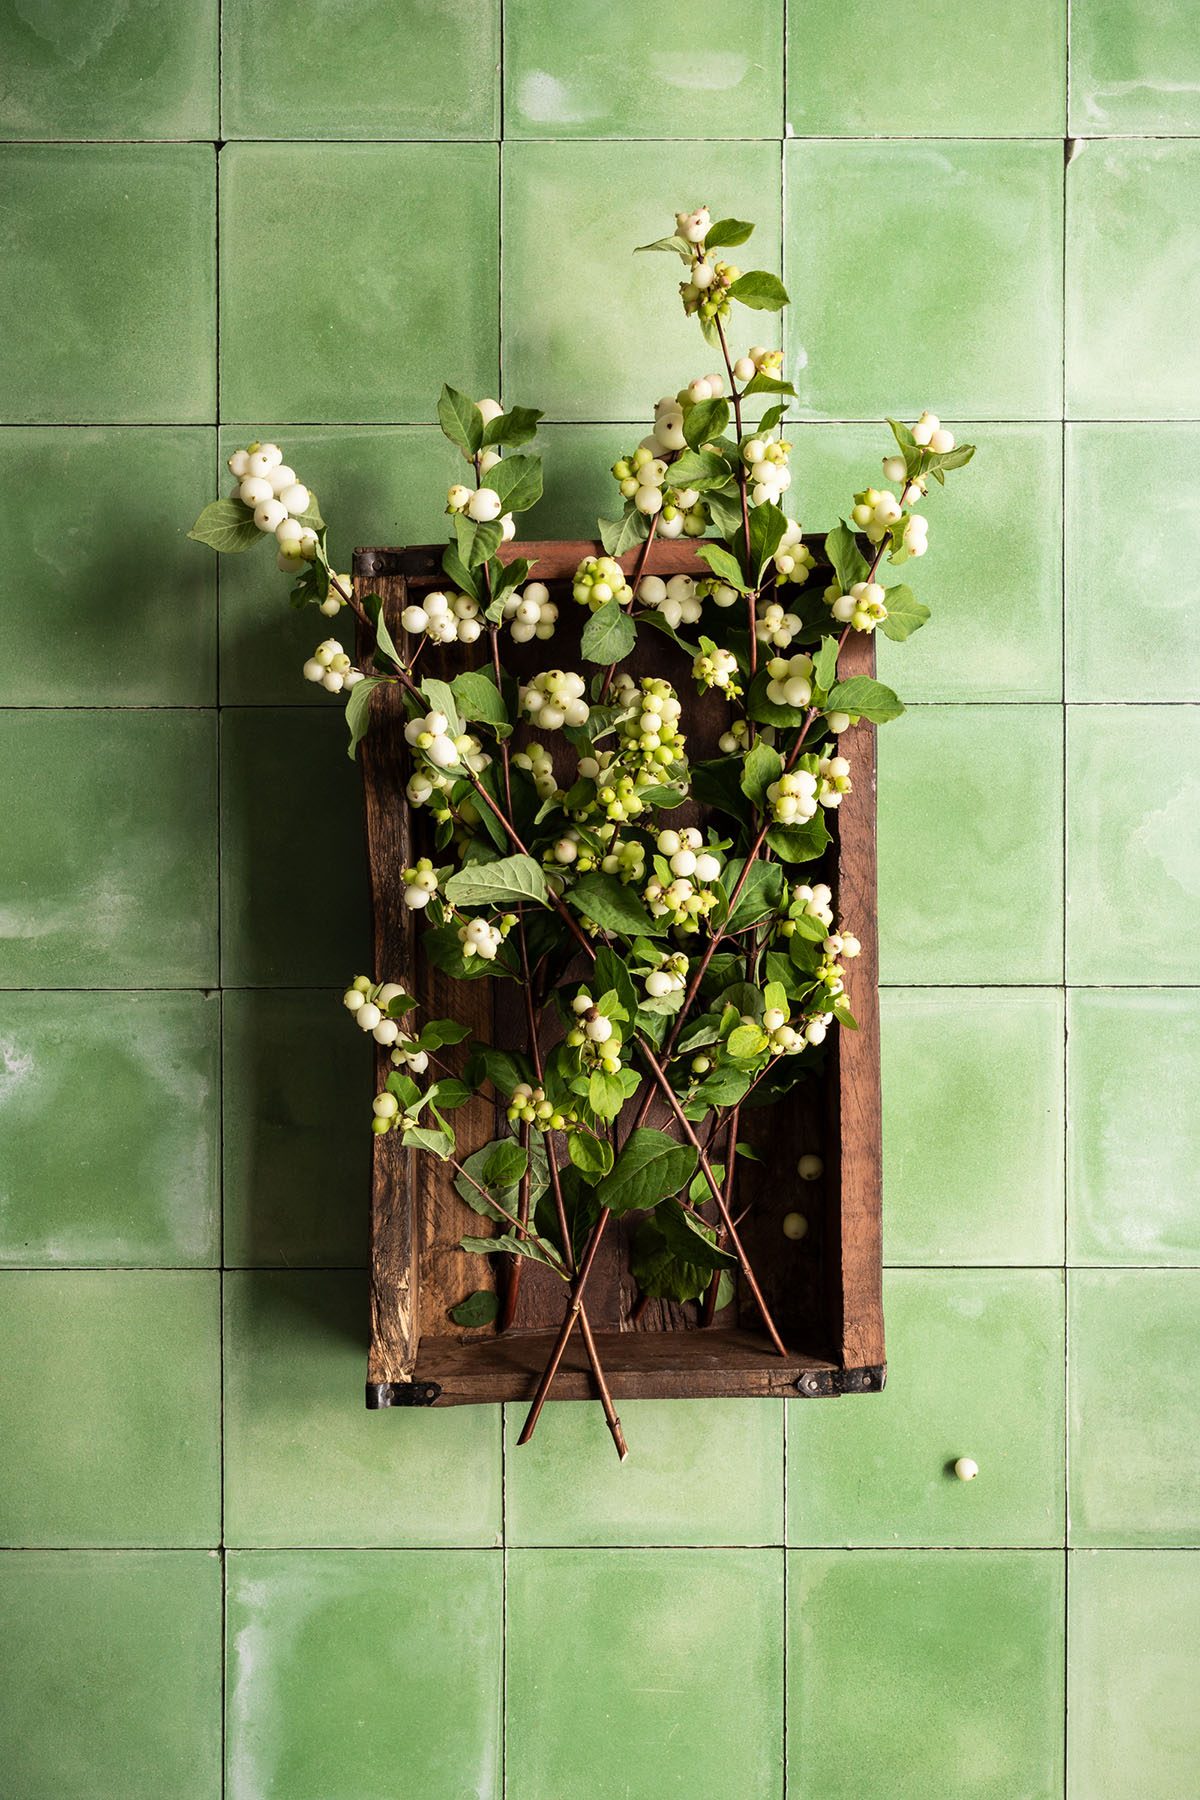 Fresh green tiles photography surface for content creation